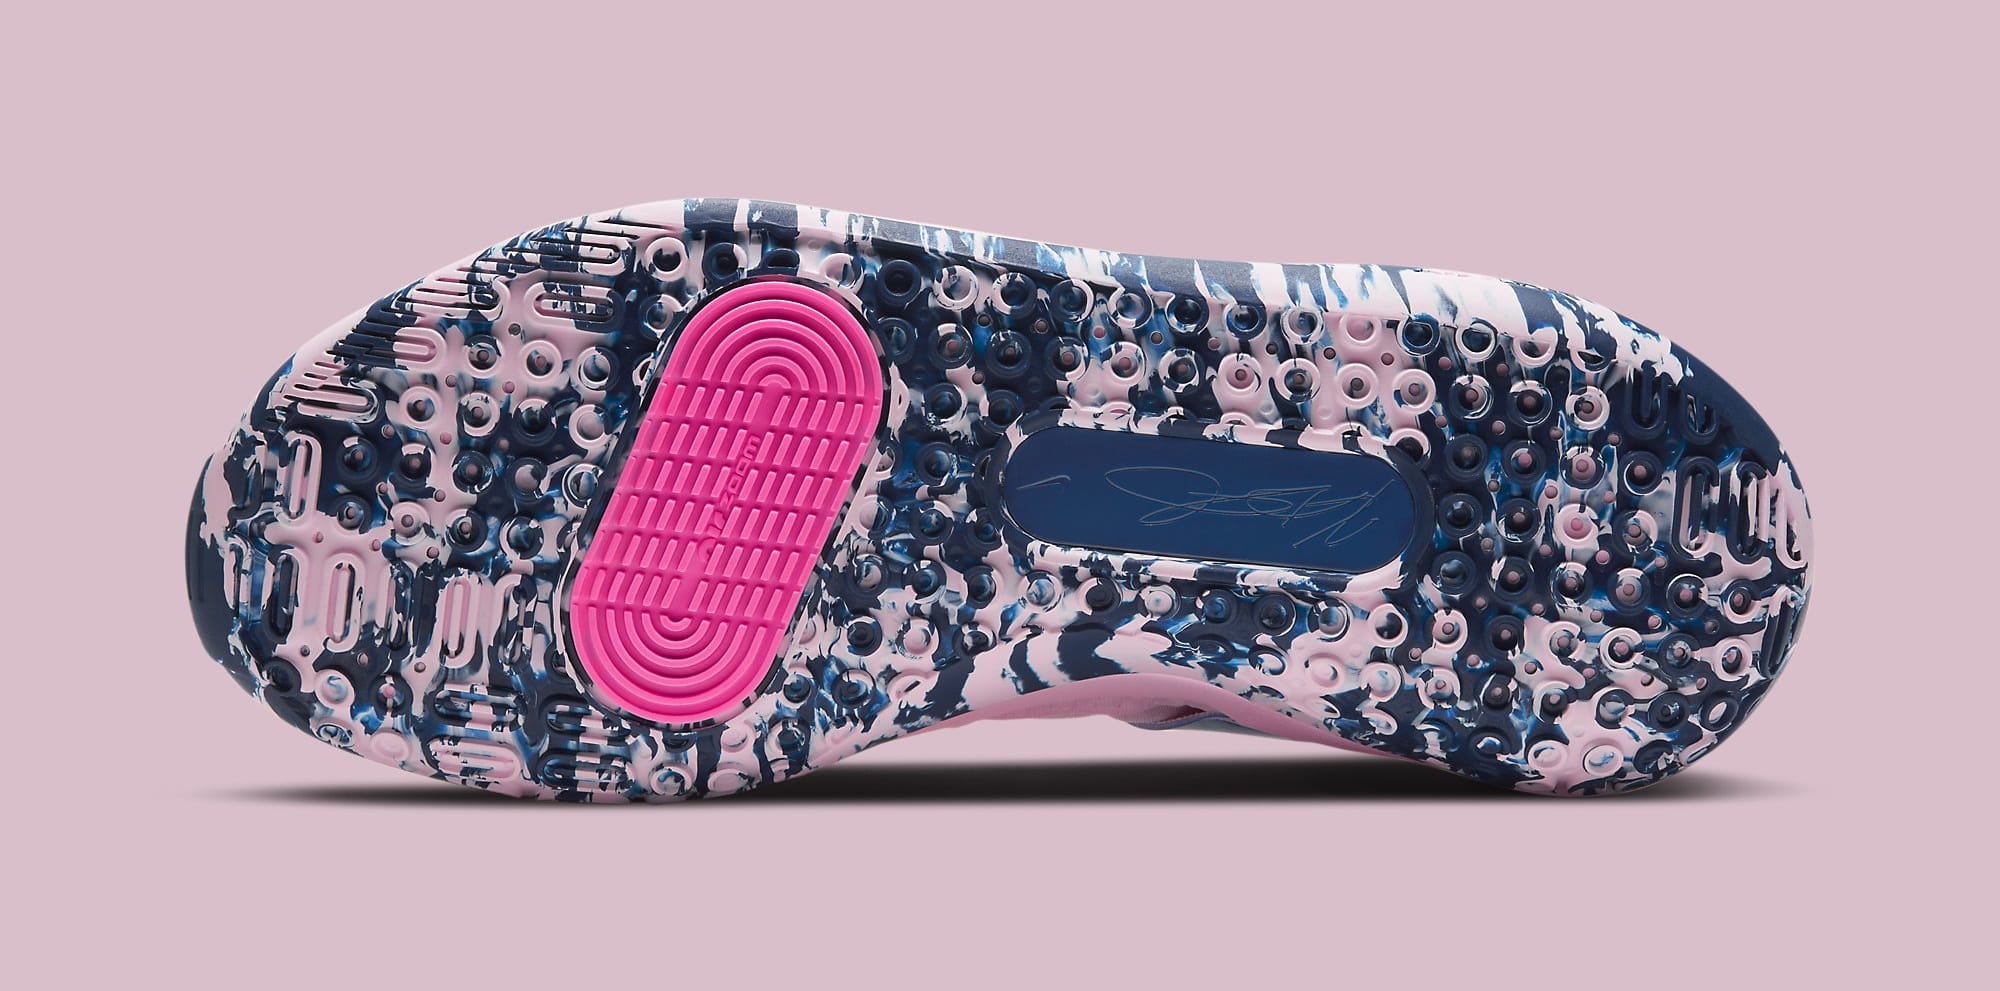 Nike KD 13 'Aunt Pearl' DC0011-600 Outsole